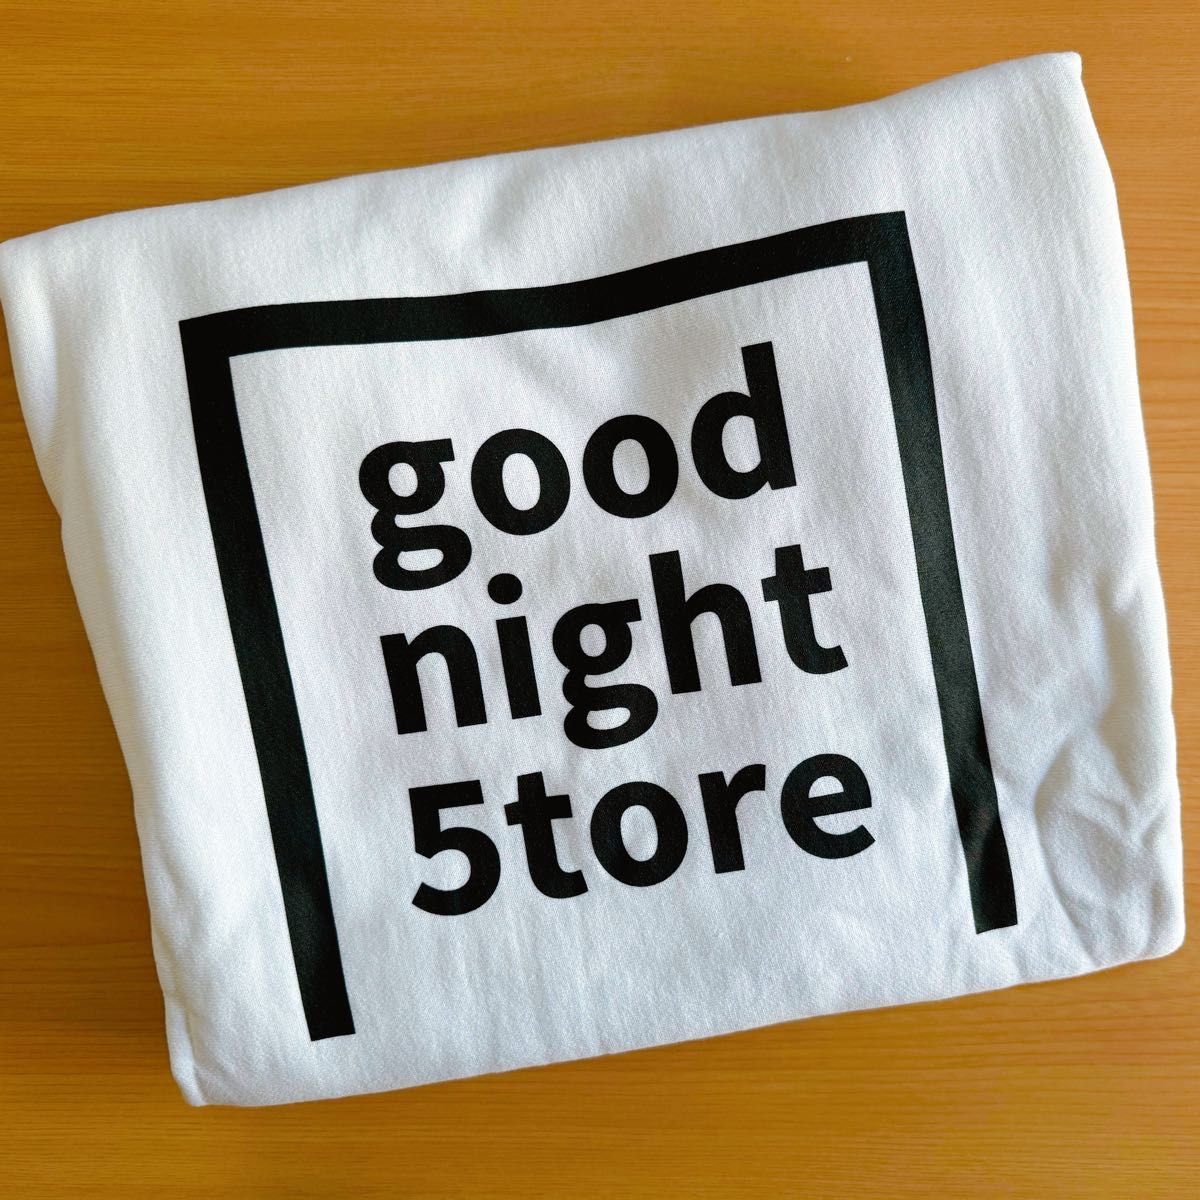 goodnight5tore GN165 limited white